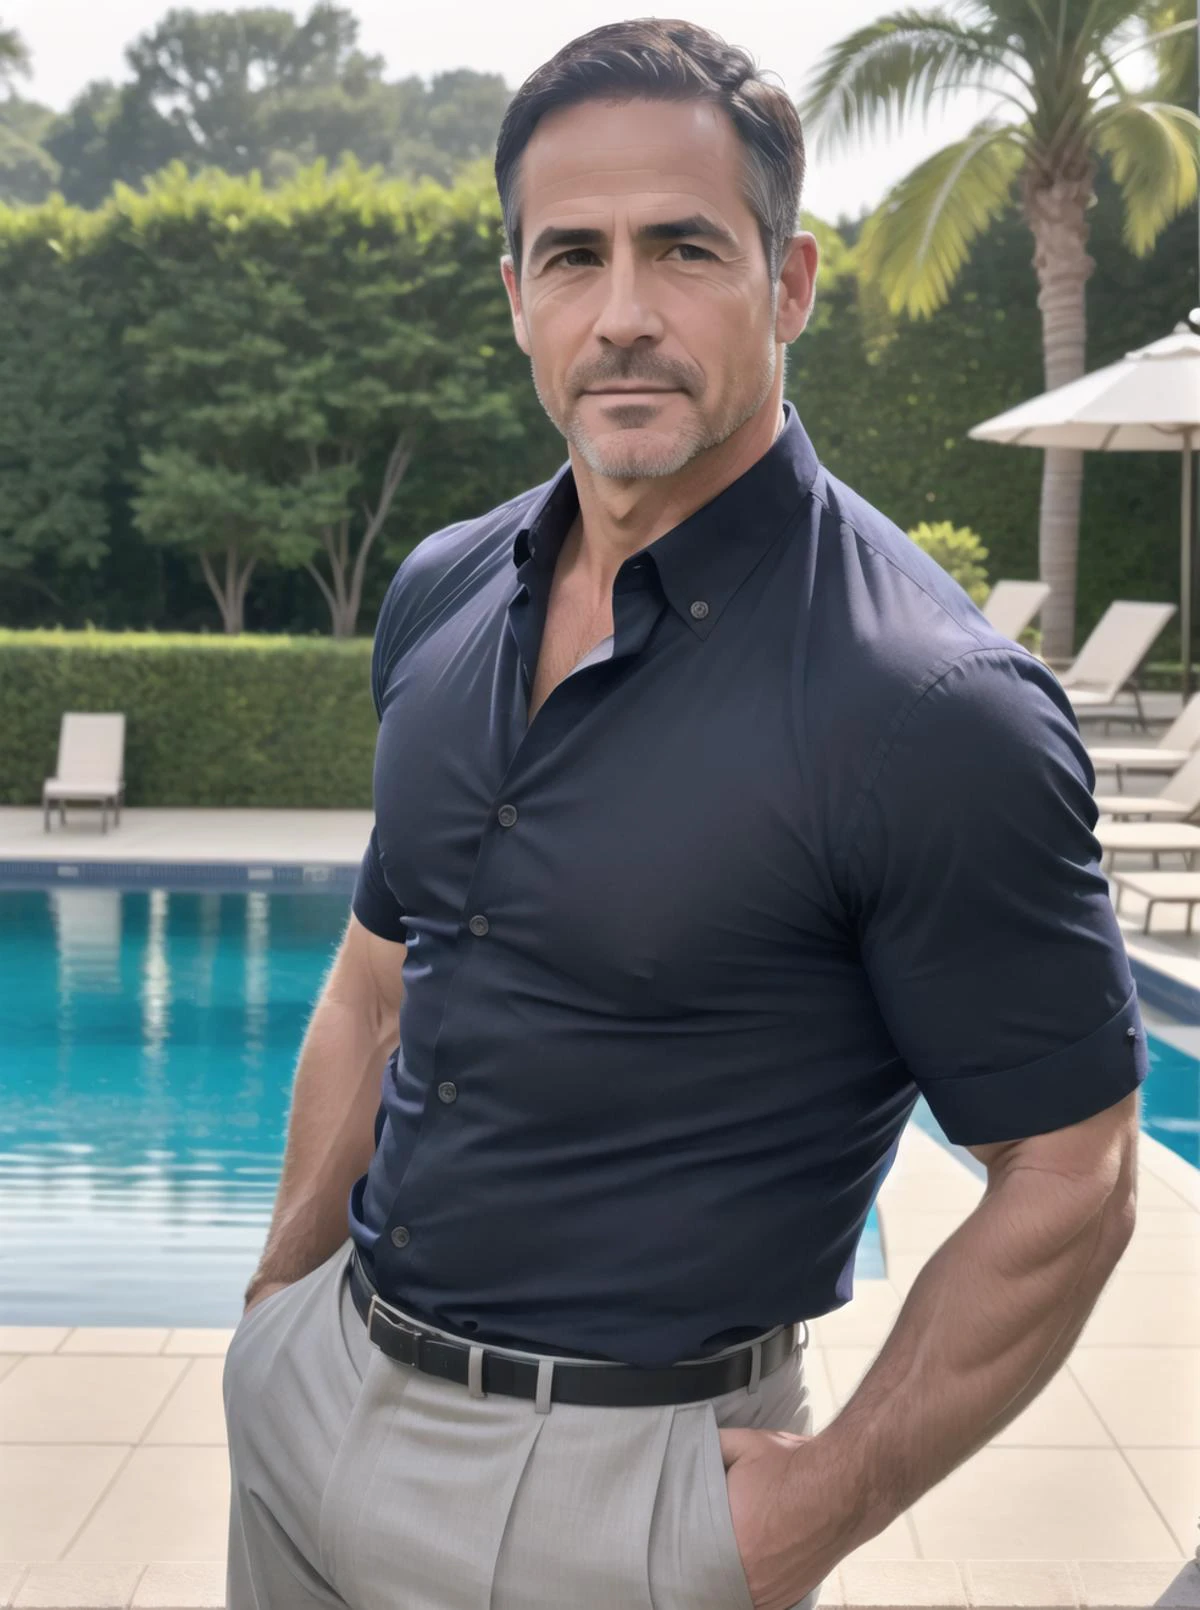 1man,cute,beautiful face,(portrait:1.2),Muscular,lean,
Short hair,Black hair,Full body,45 old man,Pectoral muscles,
Handsome,mature,stable,warm man,charming eyes,Hunter Biden,Muscular,
facing the audience,frontal,Gentlemen,
a man wearing Button-down shirt and dress trousers,swimming pool,